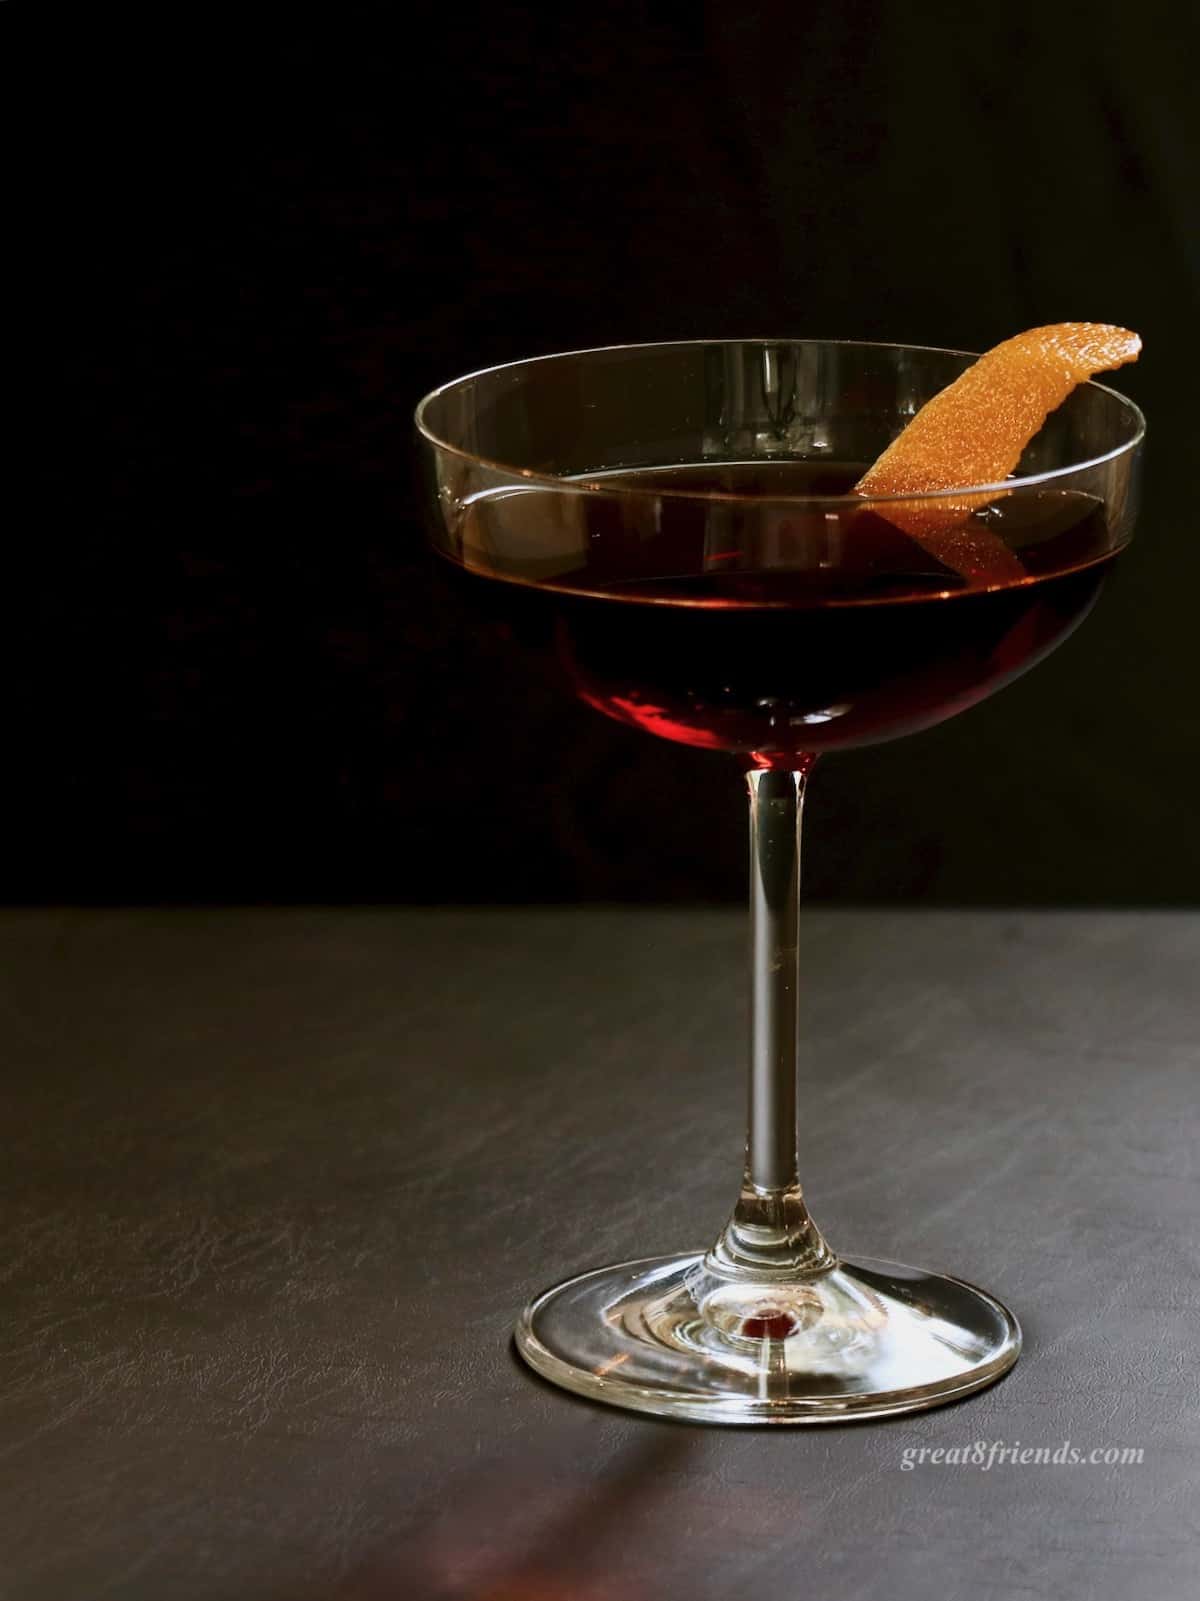 A cherry Manhattan in a coupe glass garnished with orange peel.